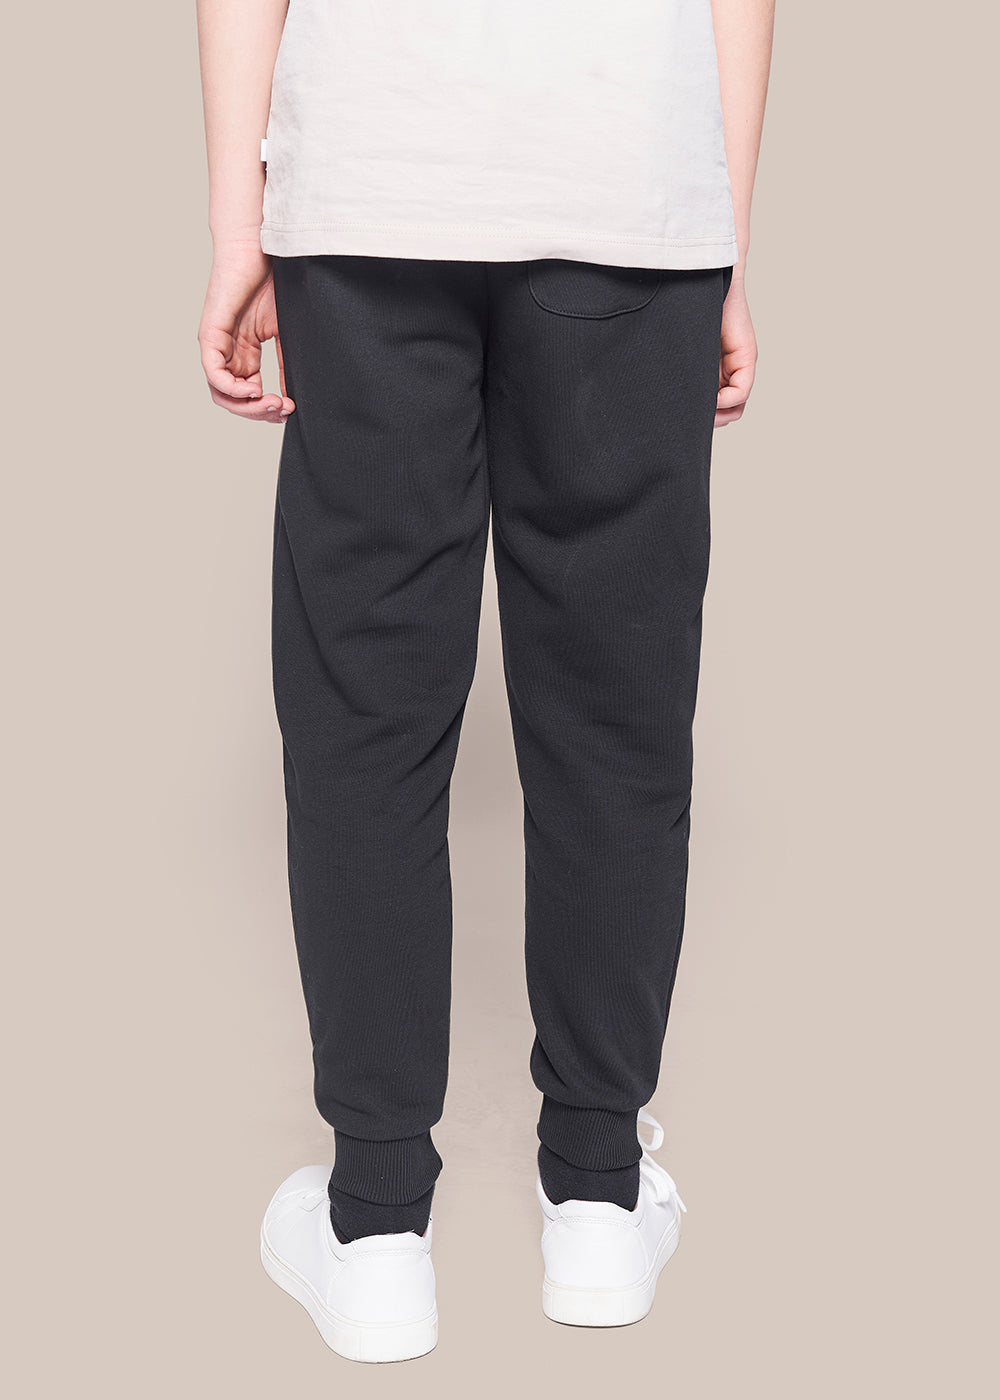 GRUNT / OUR Ask Jog Pant